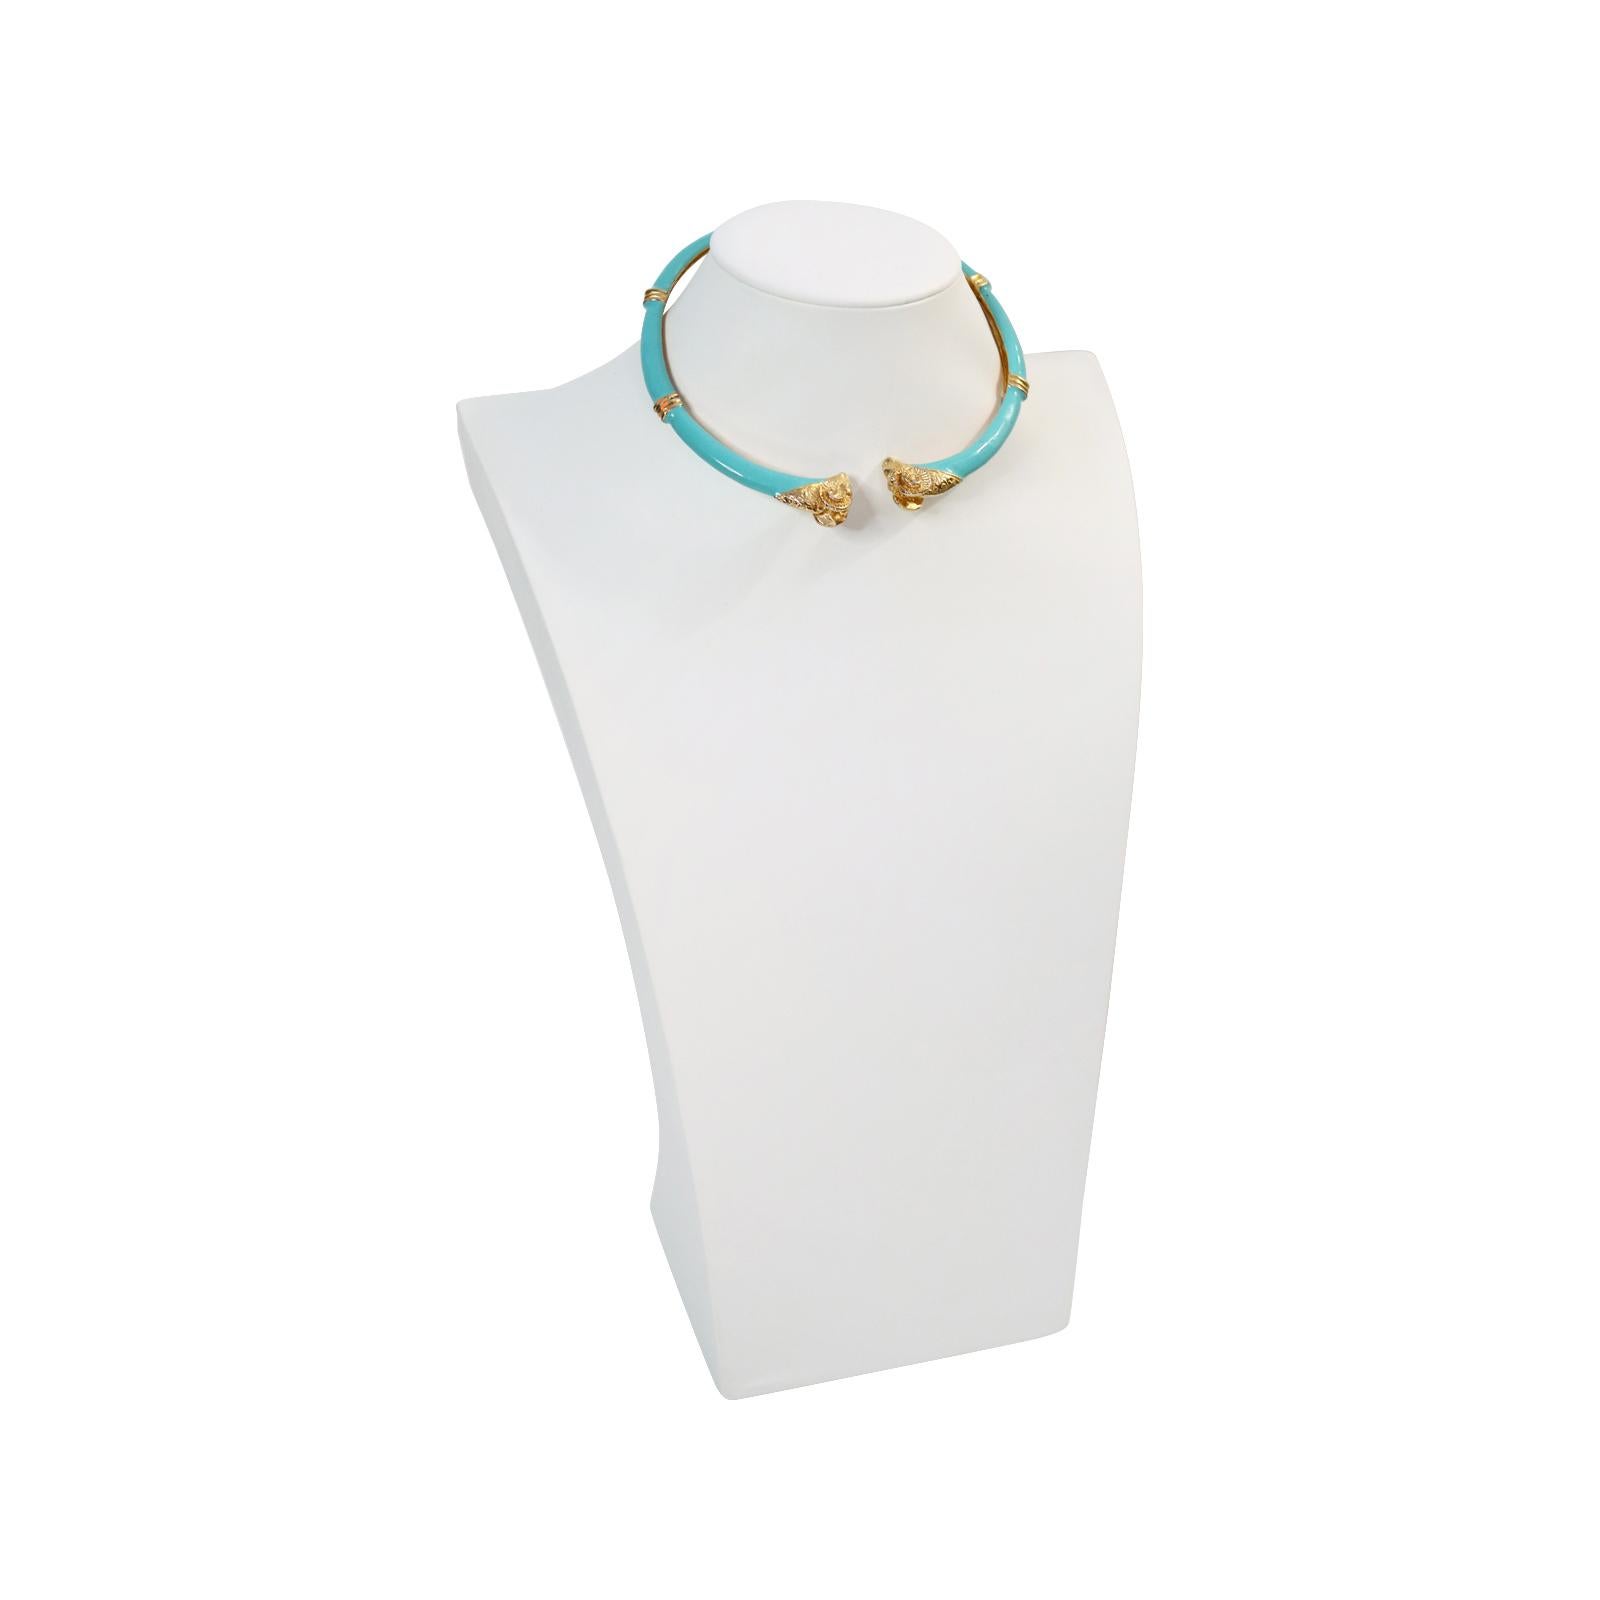 Vintage Donald Stannard Rams Head Choker in Turquoise and Gold Circa 1980s 2